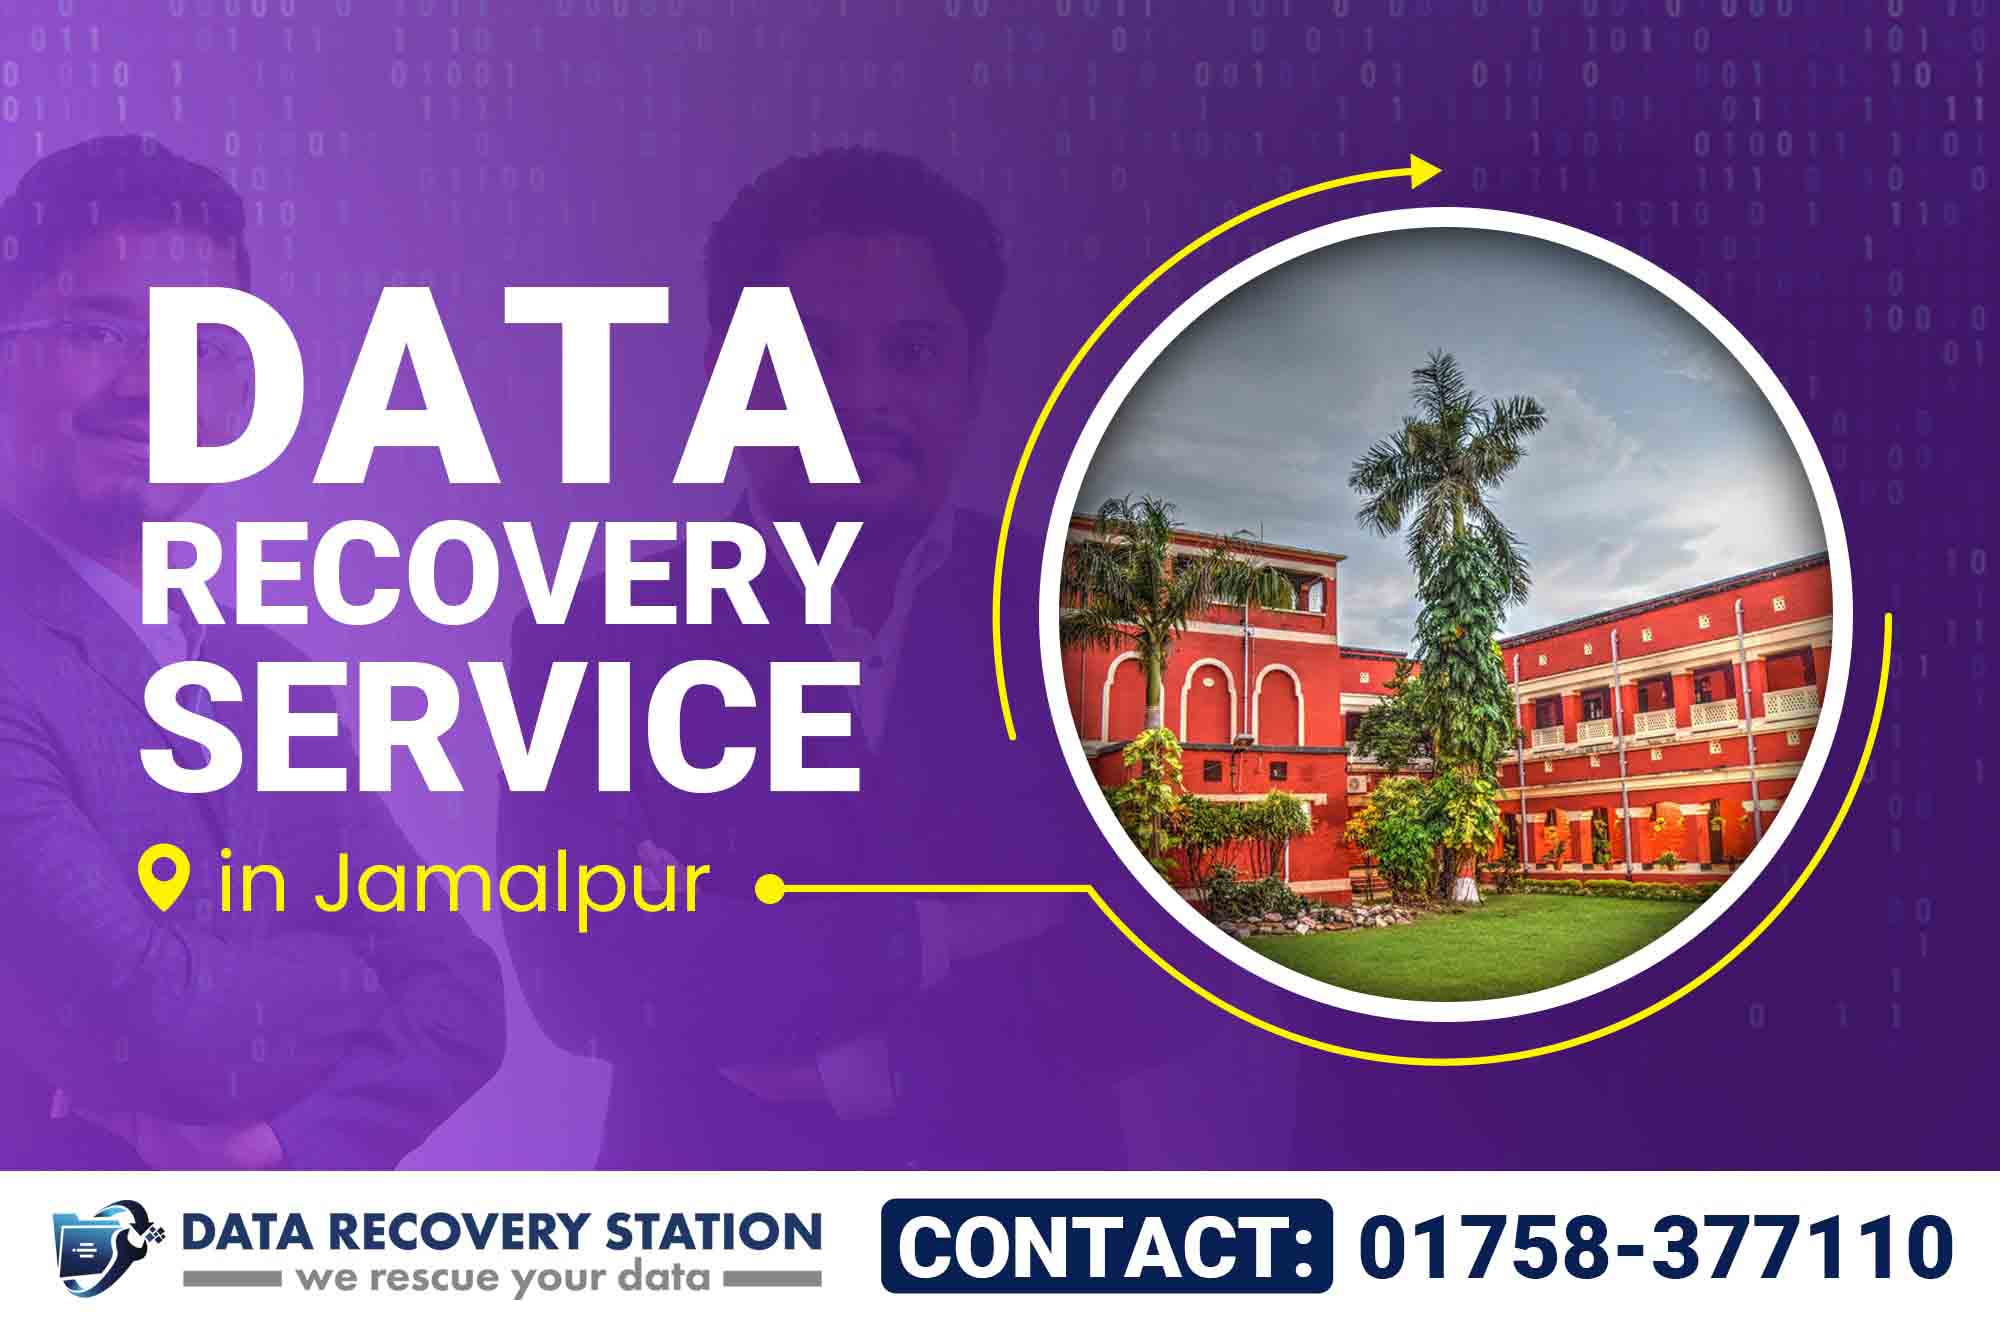 Data Recovery Service in Jamalpur - Data Recovery Station